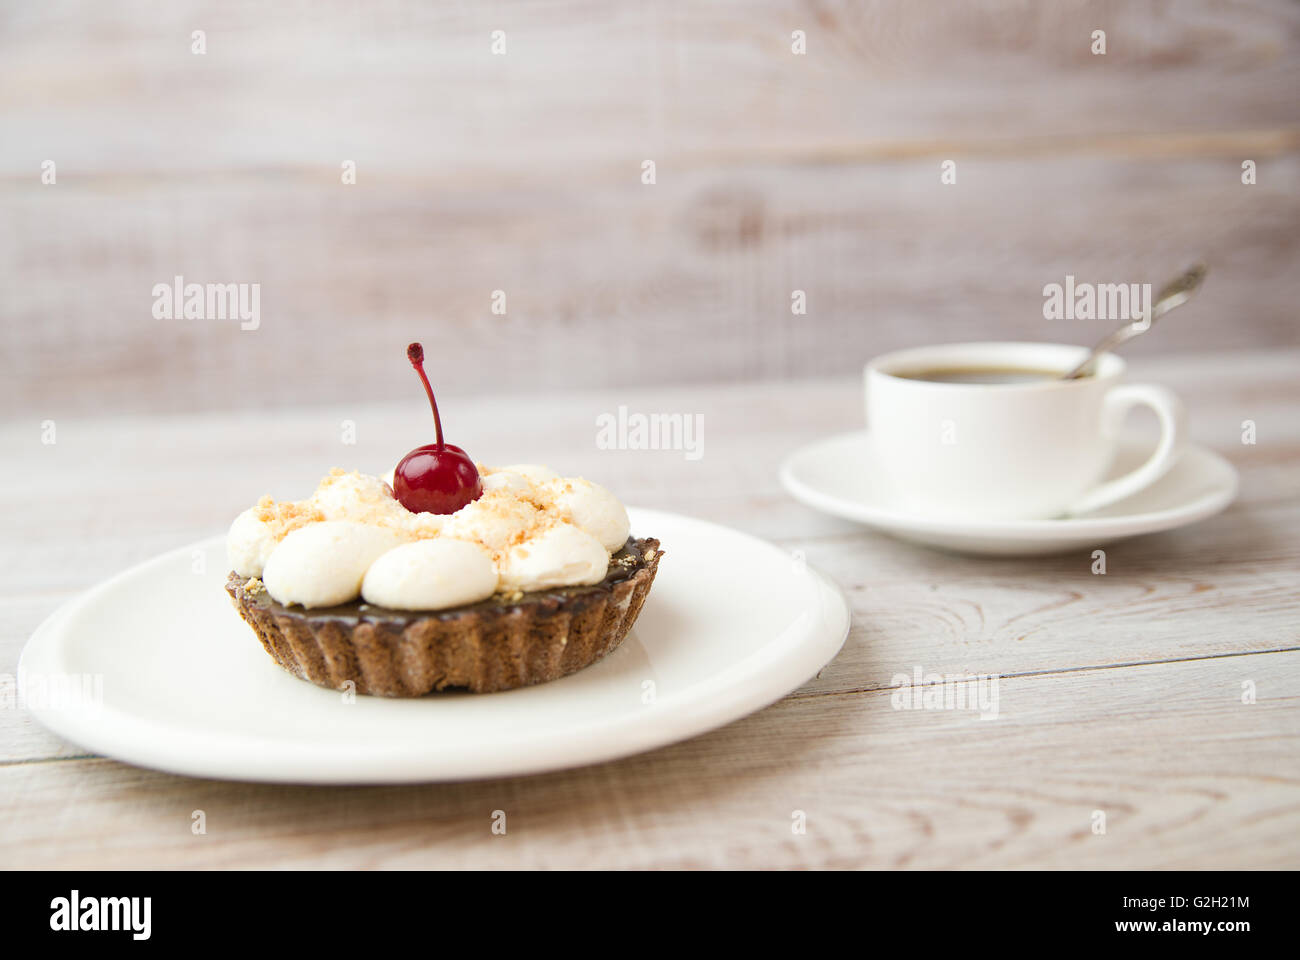 Cake with cream and white cup on the table Stock Photo